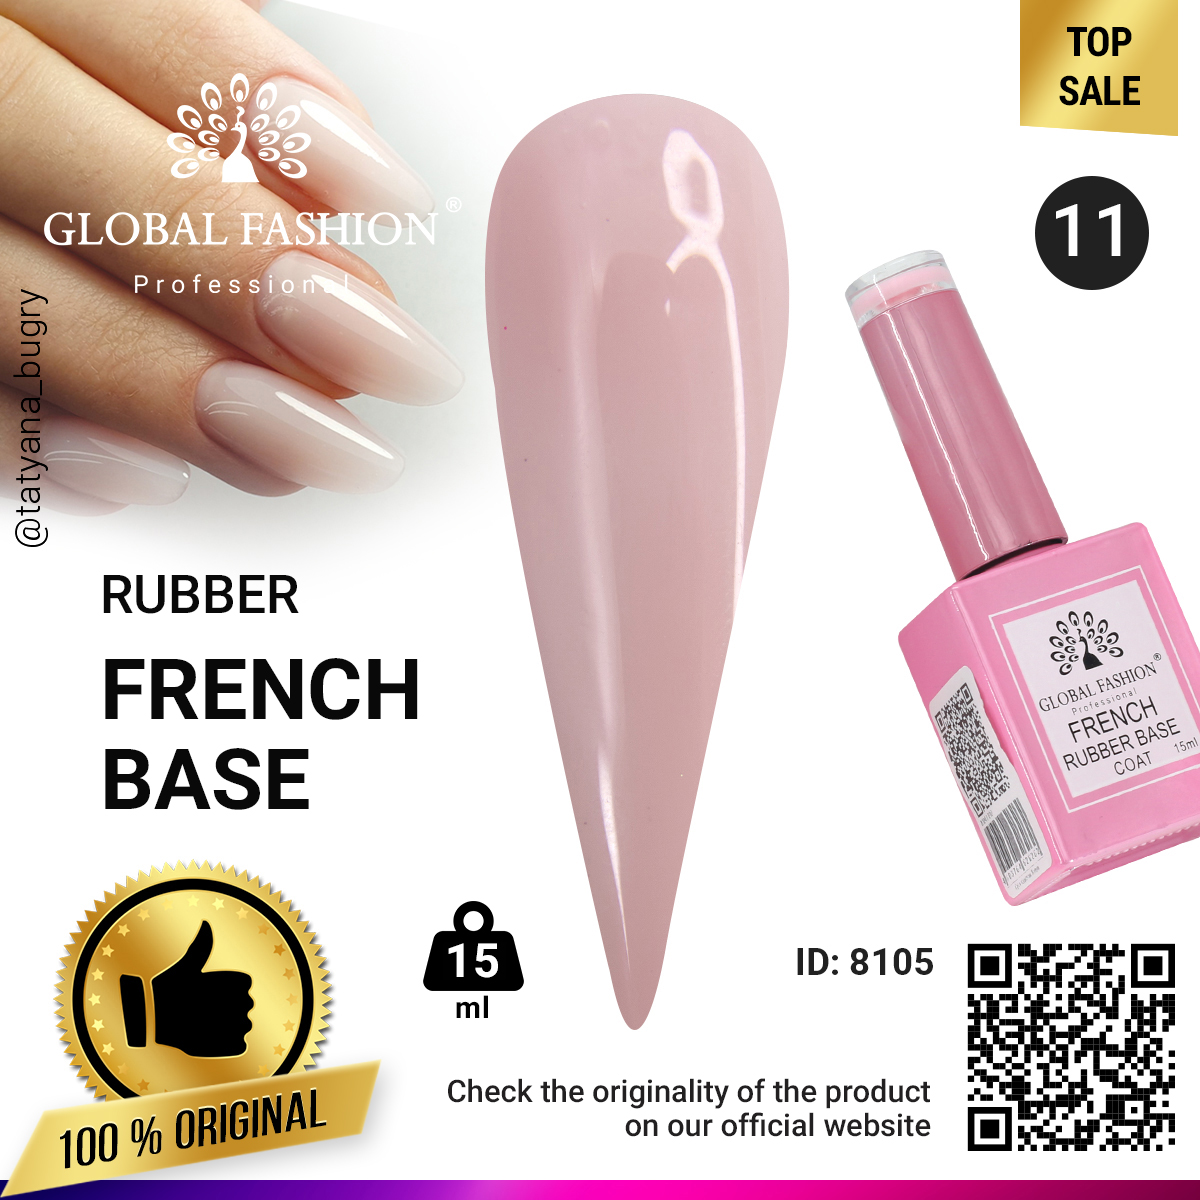 Rubber base for gel nail Polish French manicure, French Rubber Base Coat,  15 ml., Global Fashion 11